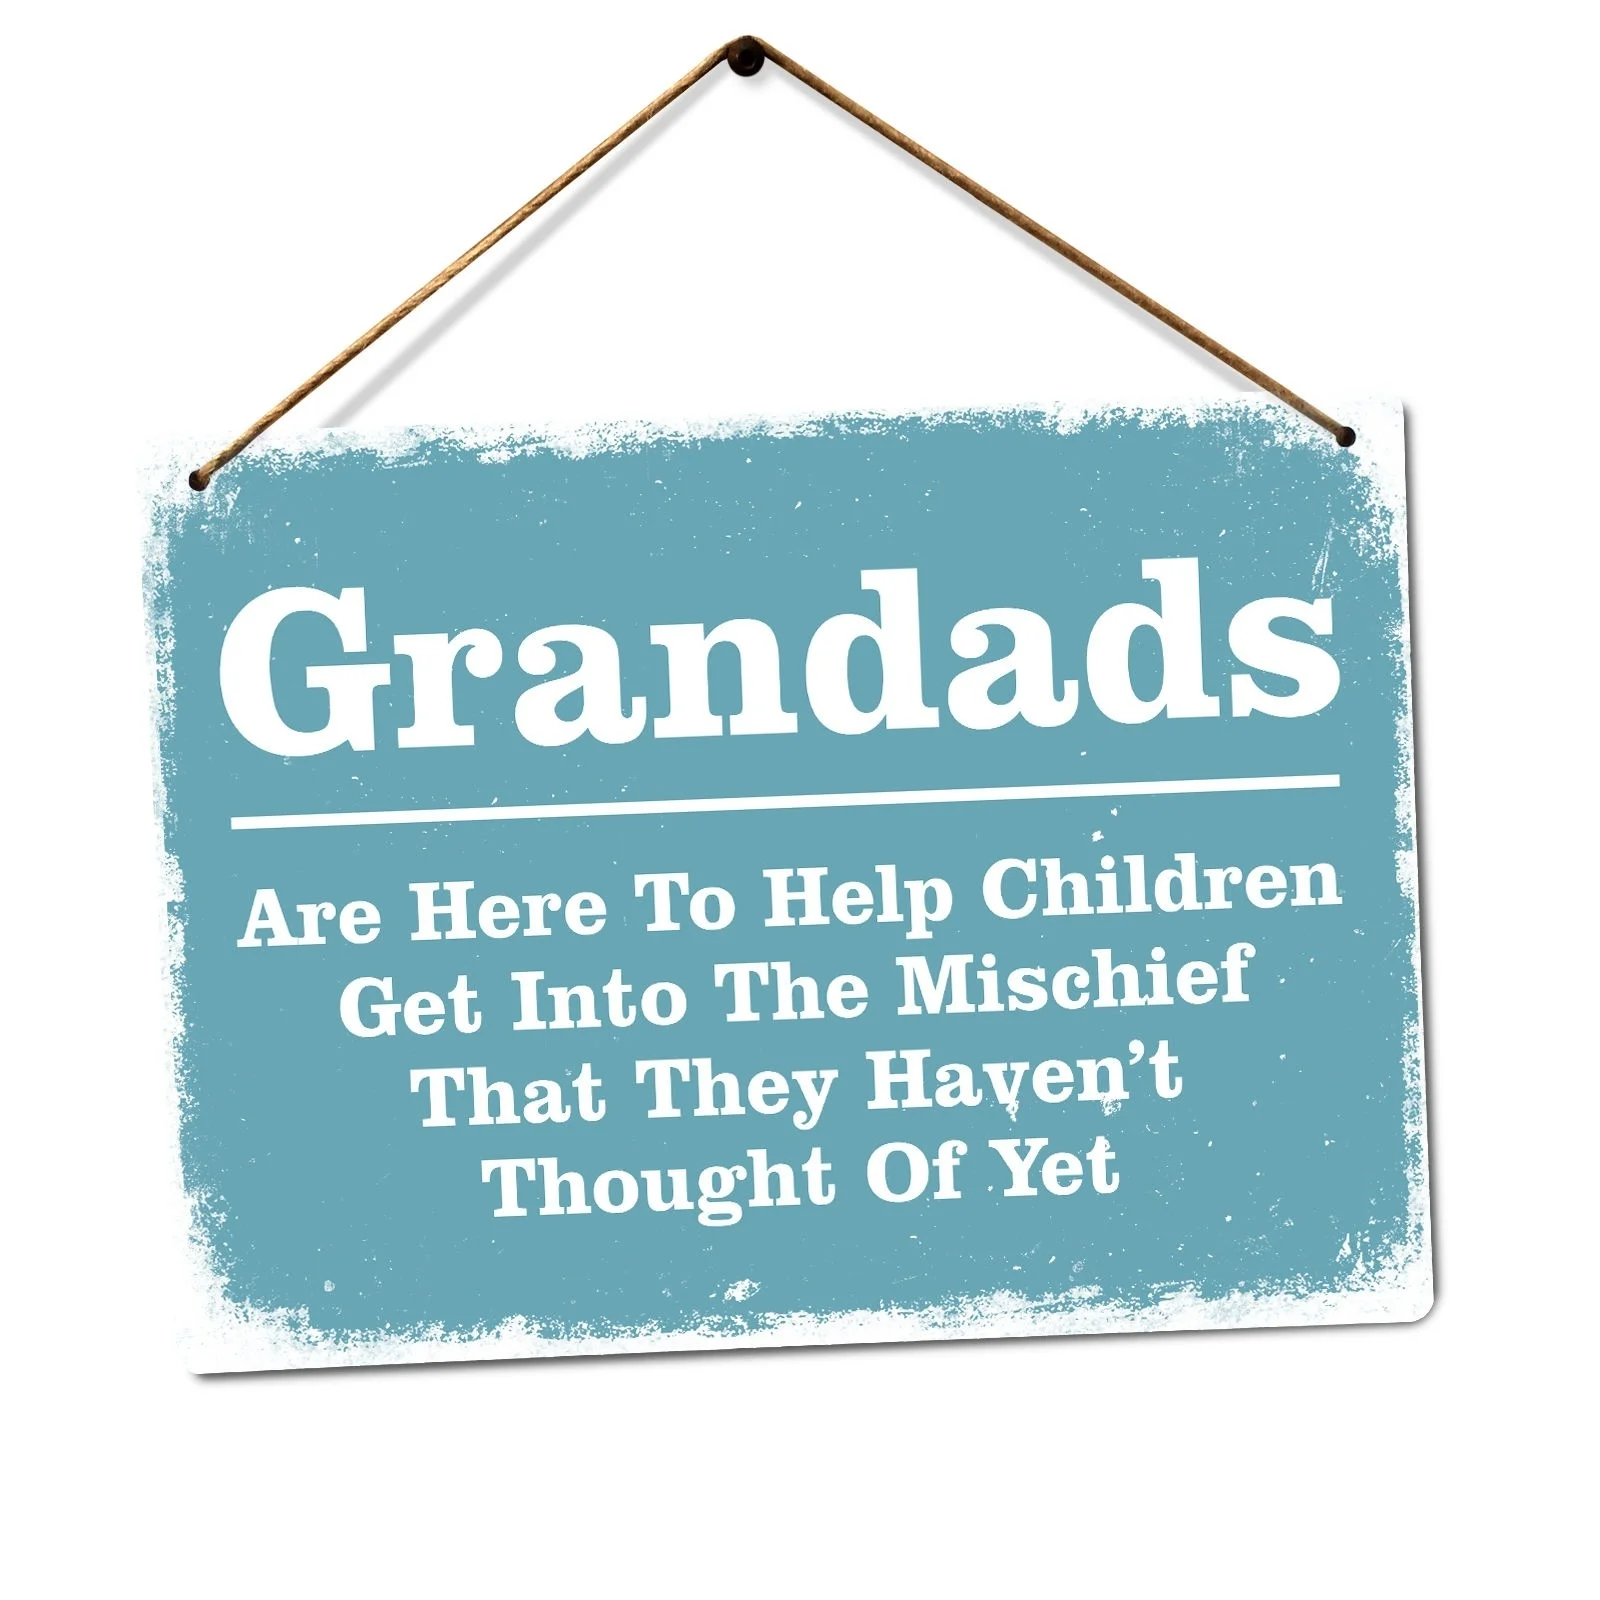 

Grandads - Mischief -Metal Wall Sign Plaque Art- Grandparents Kids Funny Joke(Visit Our Store, More Products!!!)